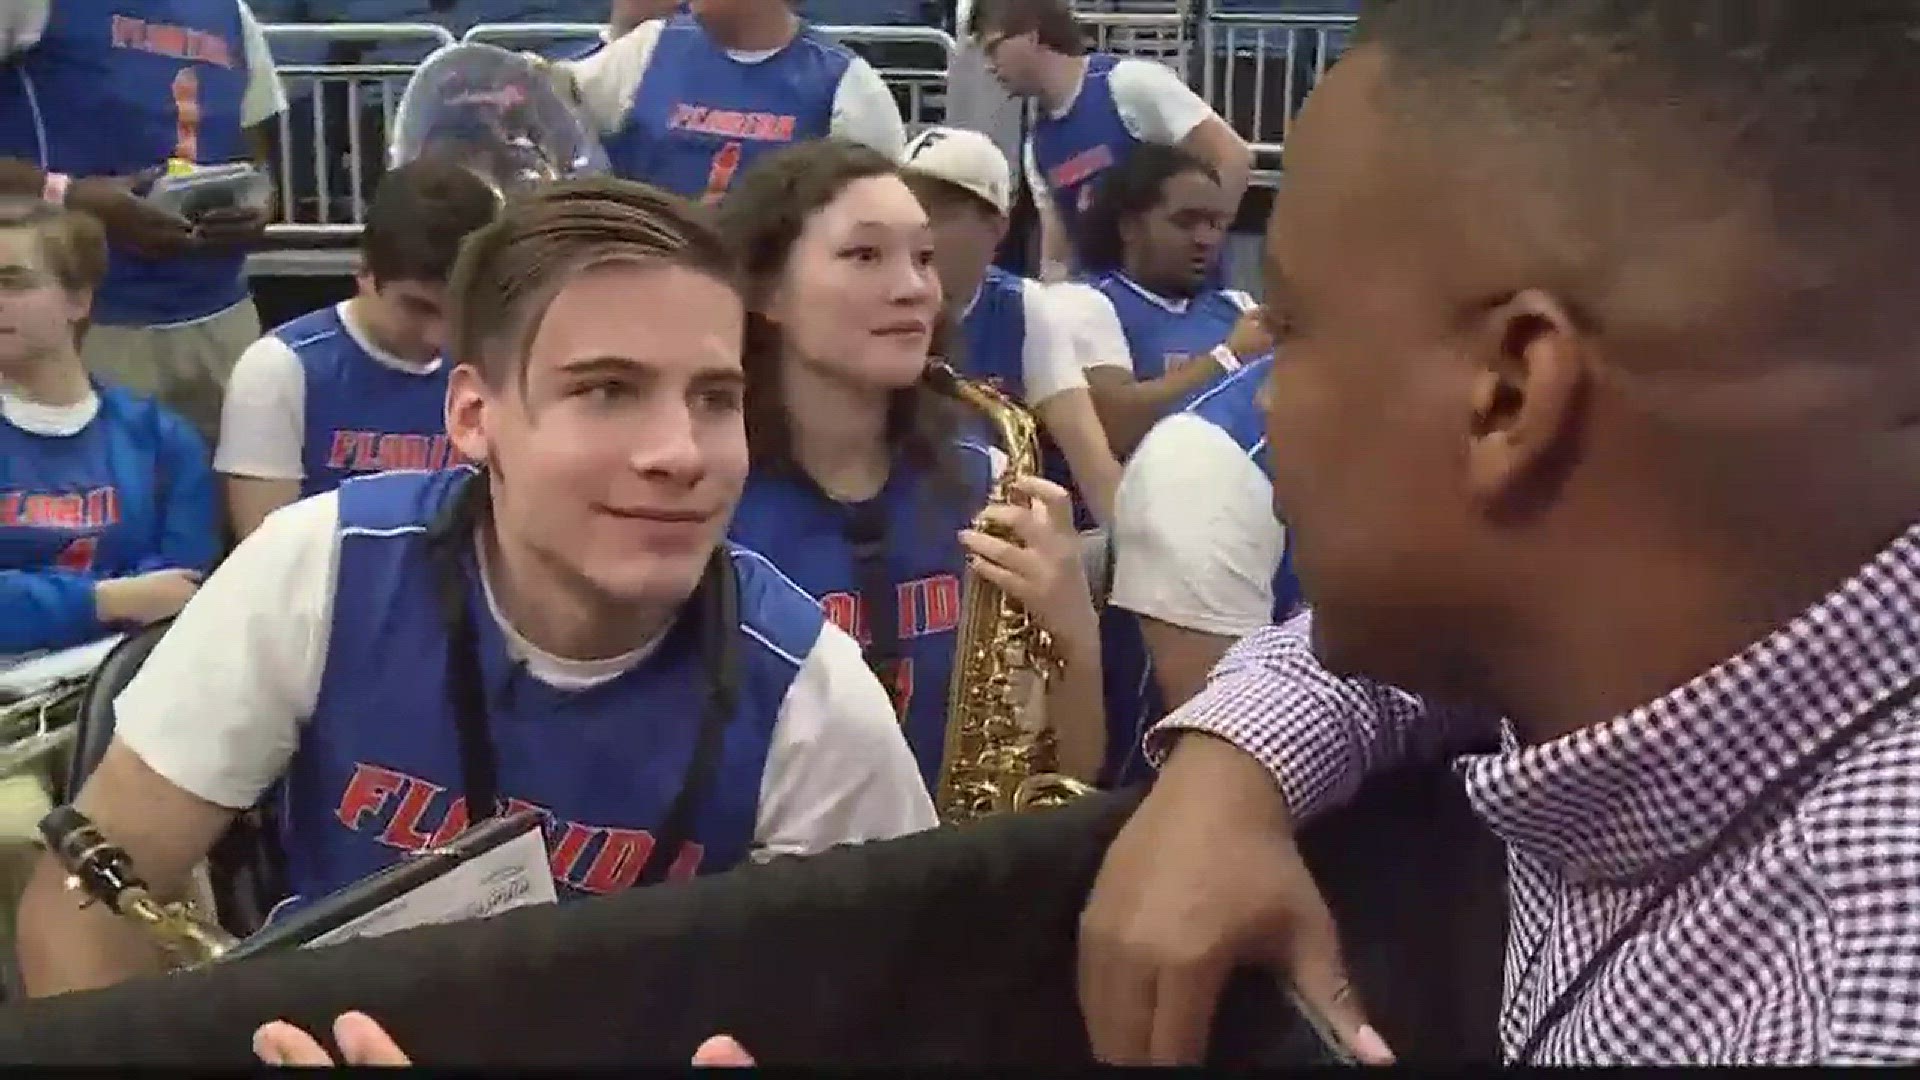 Local musician in Florida pep band at NCAA tournament